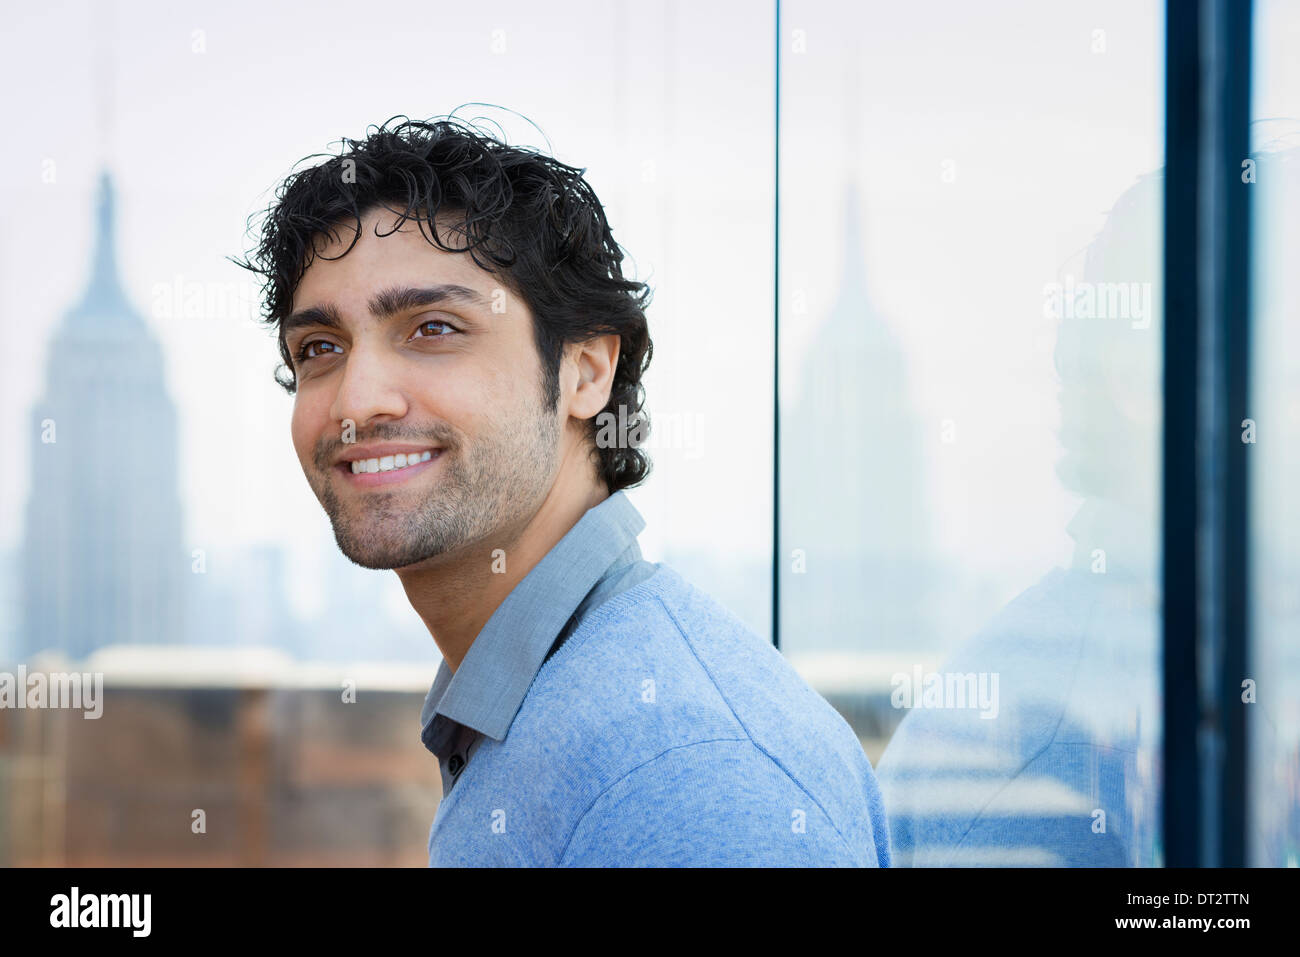 Urban Lifestyle A young man with black curly hair wearing a blue shirt in the lobby of a building Stock Photo